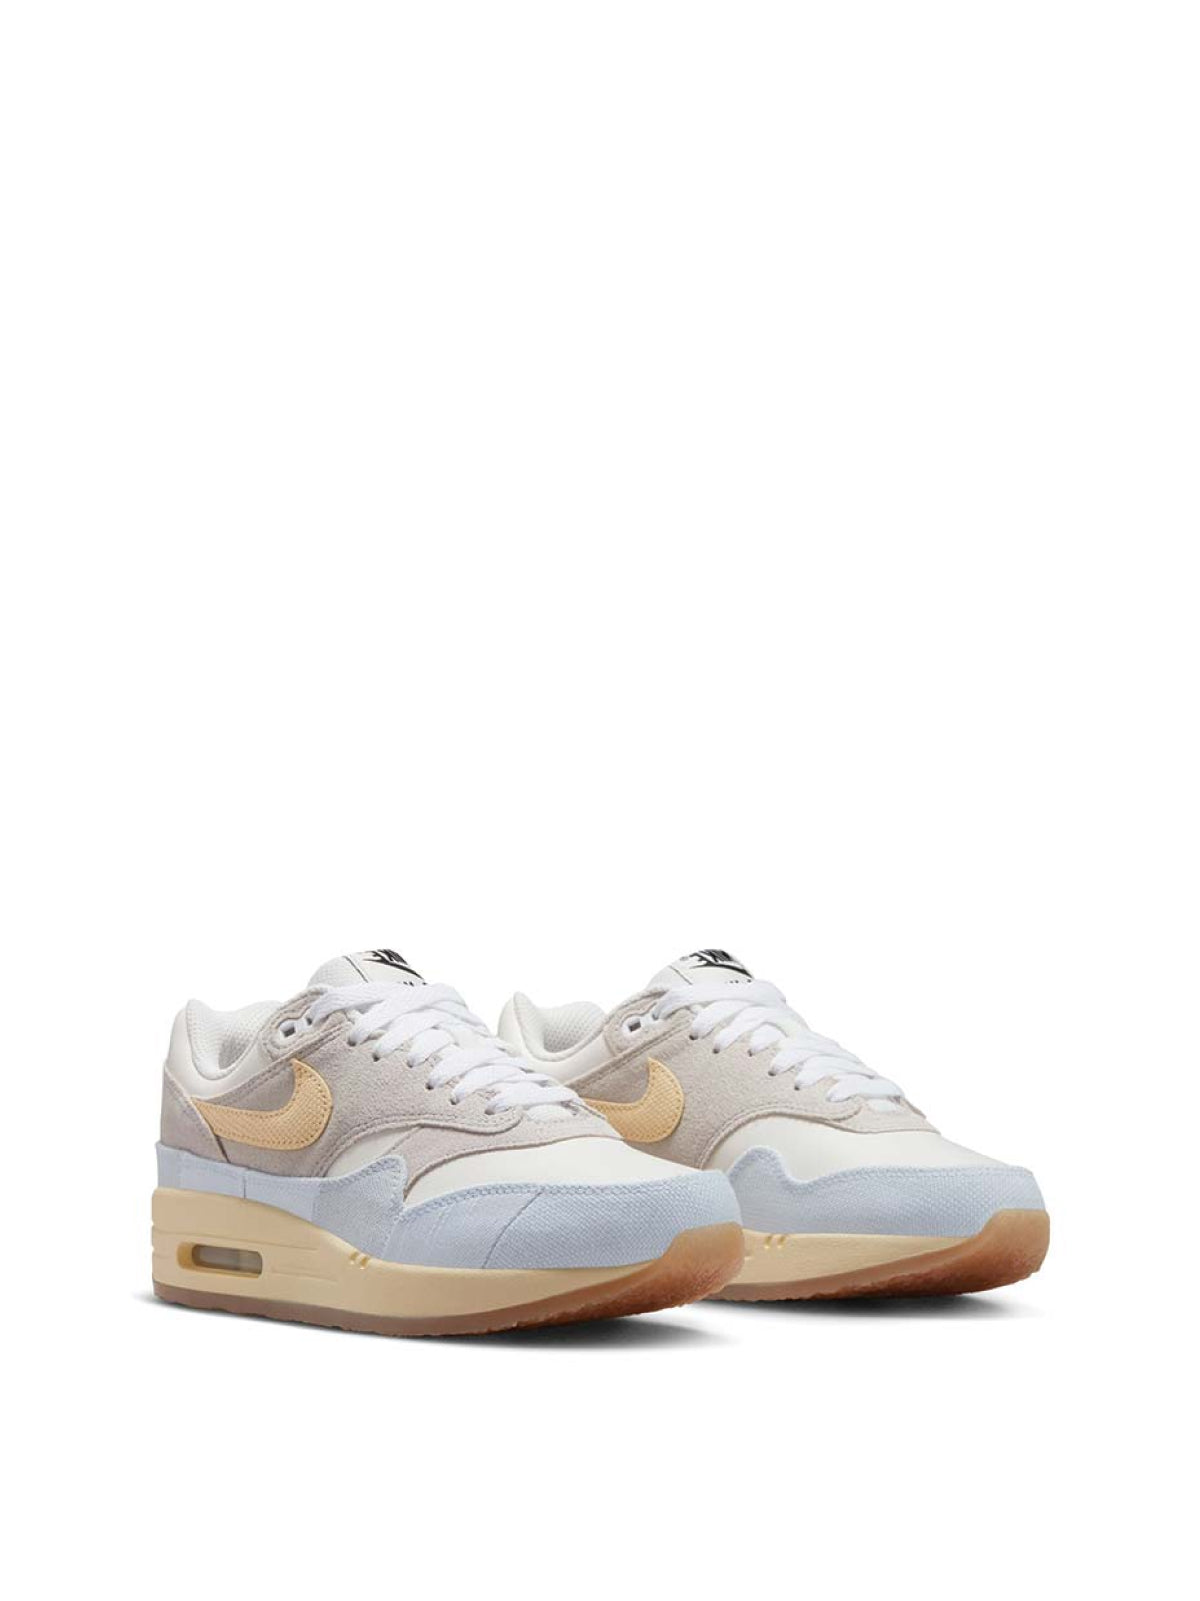 Nike-OUTLET-SALE-Air Max 1 '87 Sneakers-ARCHIVIST